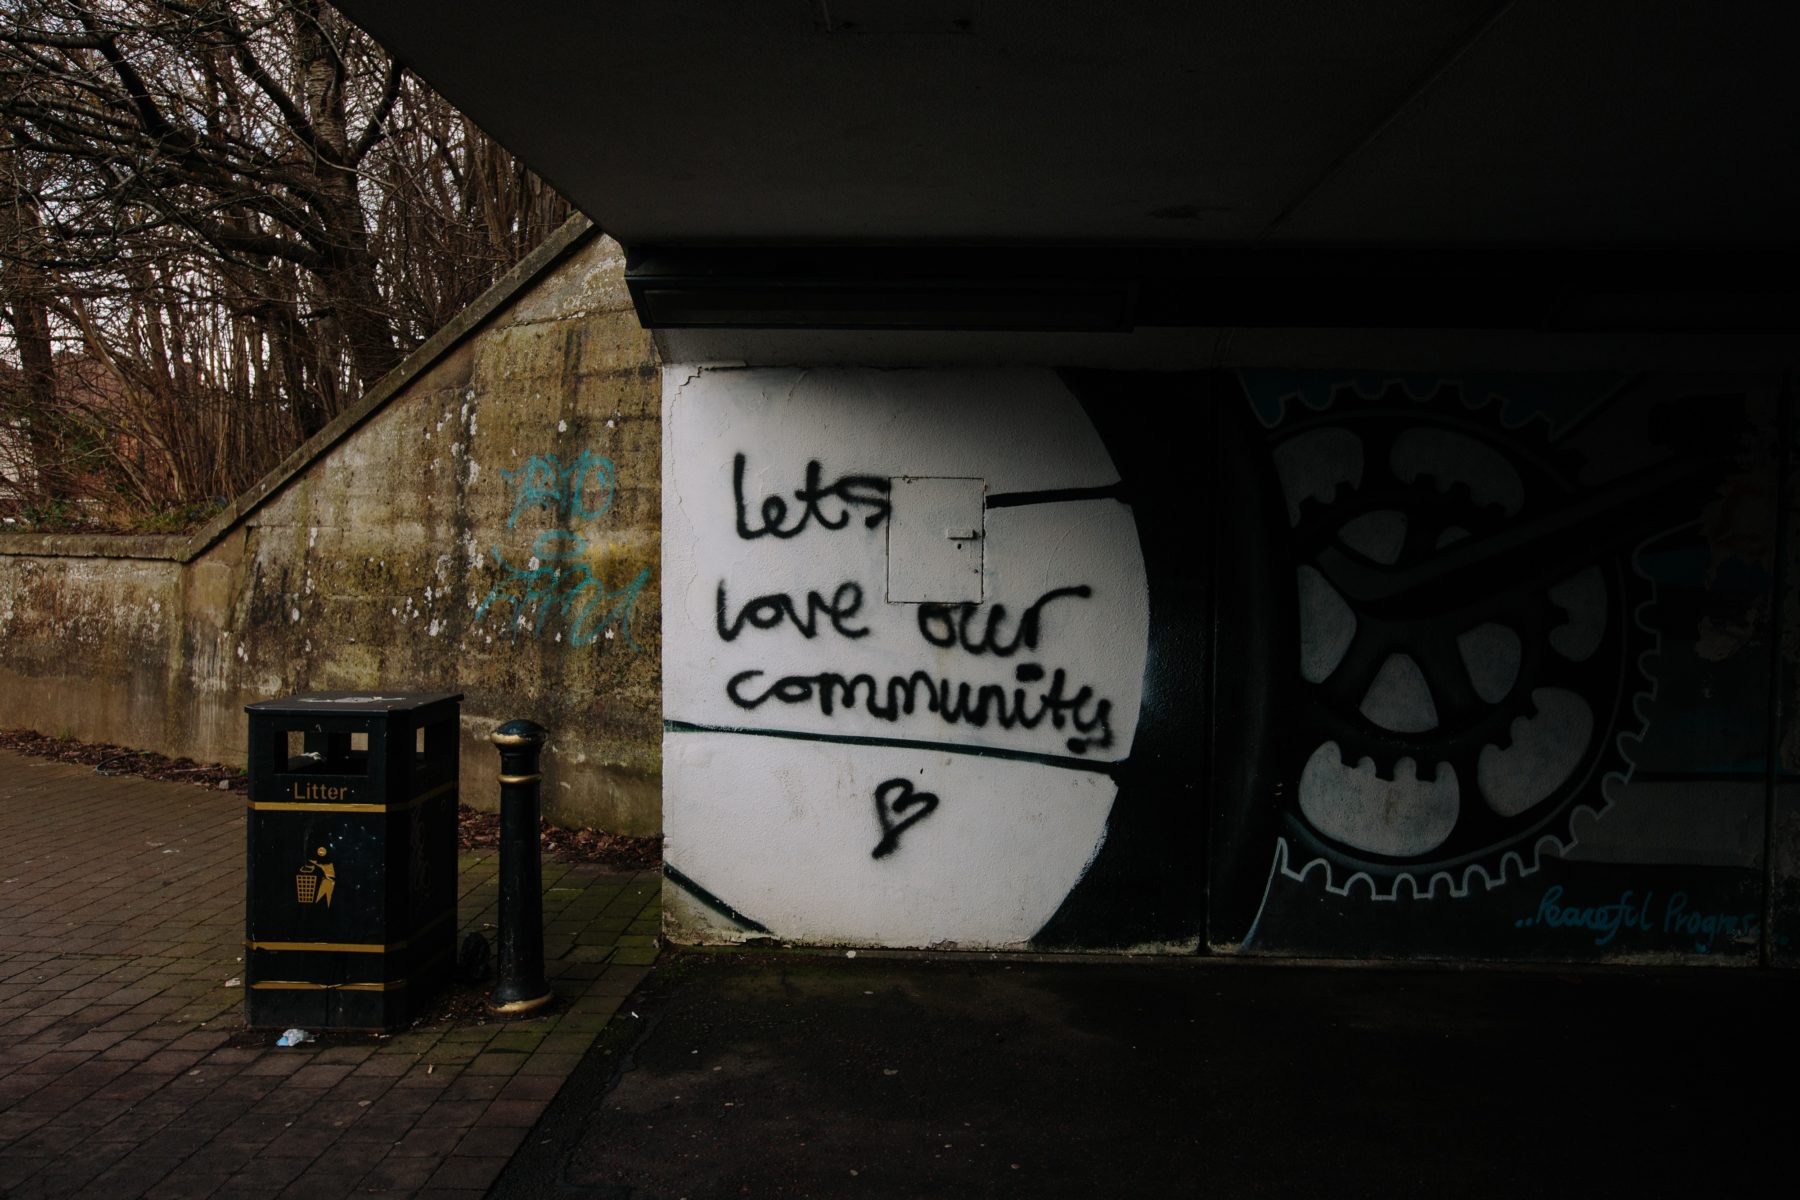 A piece of graffiti in an underpass that says "let's love our community."